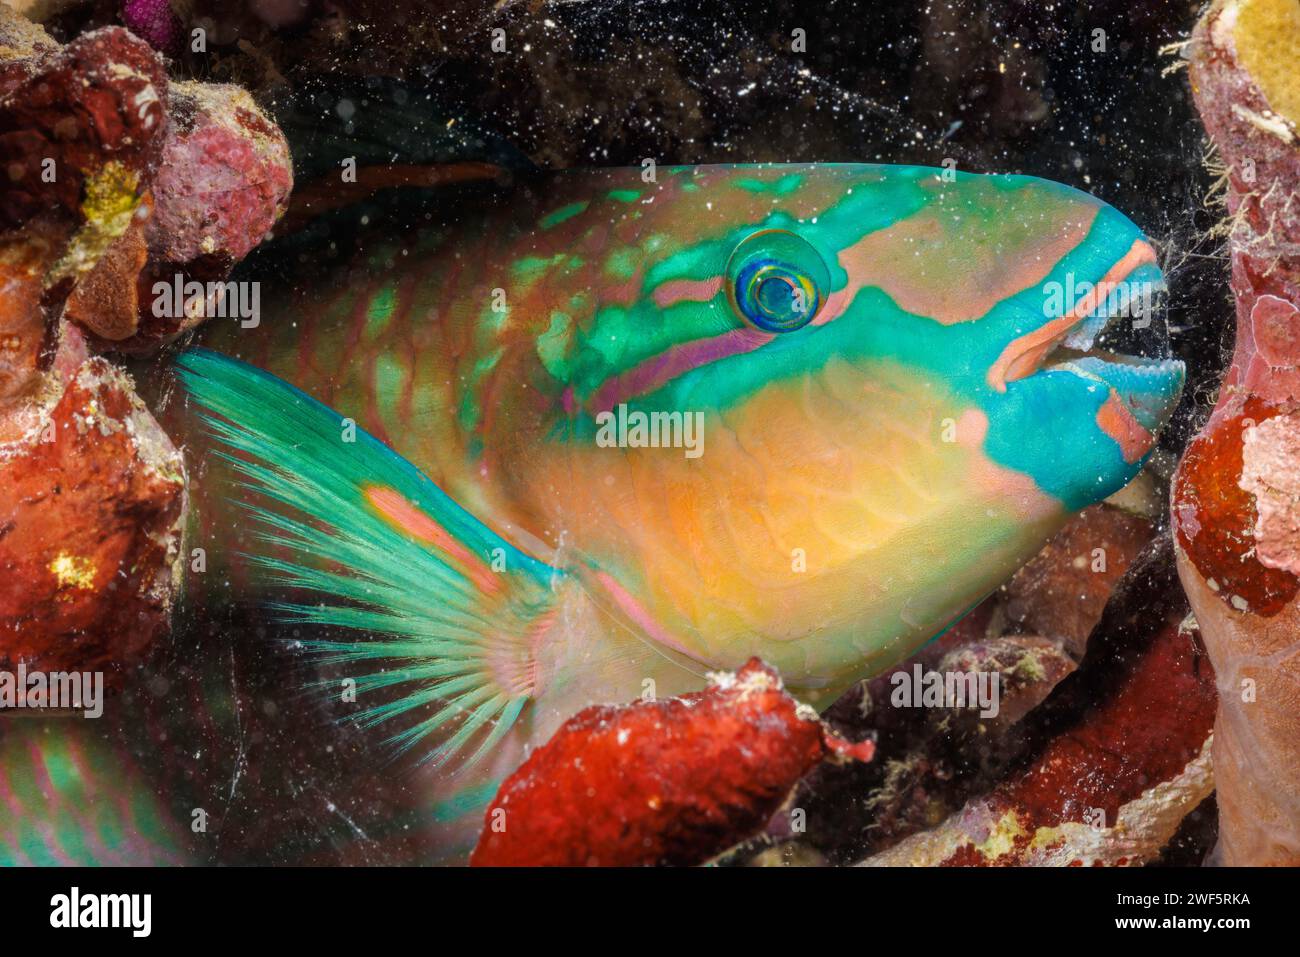 This tricolor parrotfish, Scarus tricolor, has secreted a mucus bubble to protect it from predators at night, Yap, Federated States of Micronesia. Stock Photo